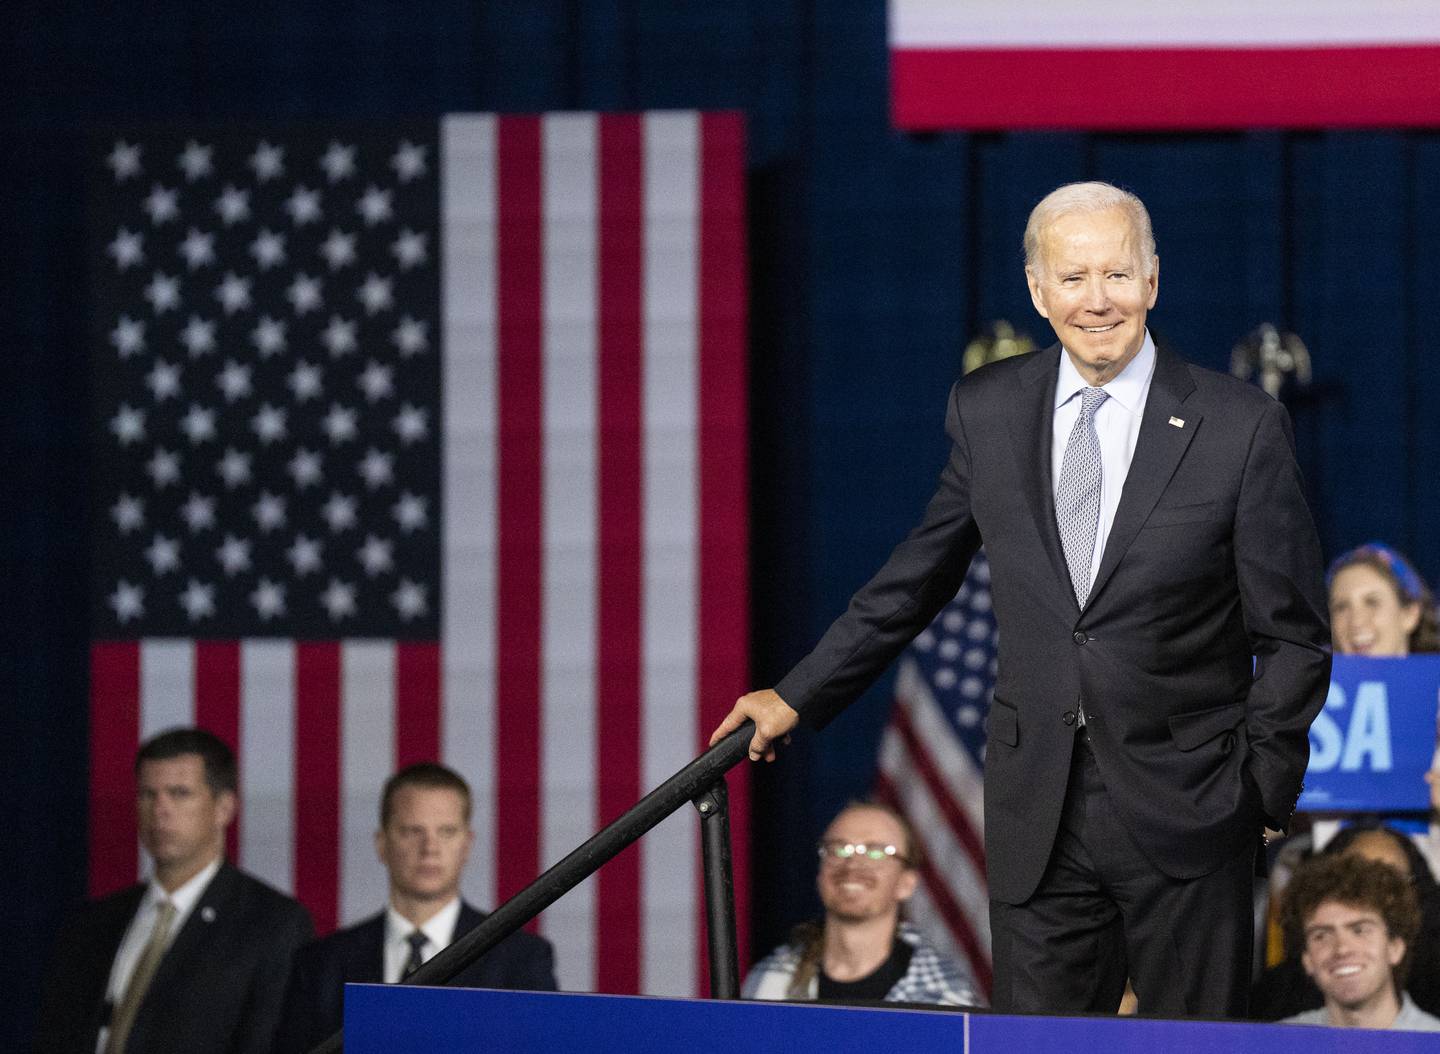 United States President Joe Biden waits on stage before speaking at a campaign event in support of gubernatorial candidate Wes Moore at Bowie State University, in Bowie, MD. November 7, 2022.